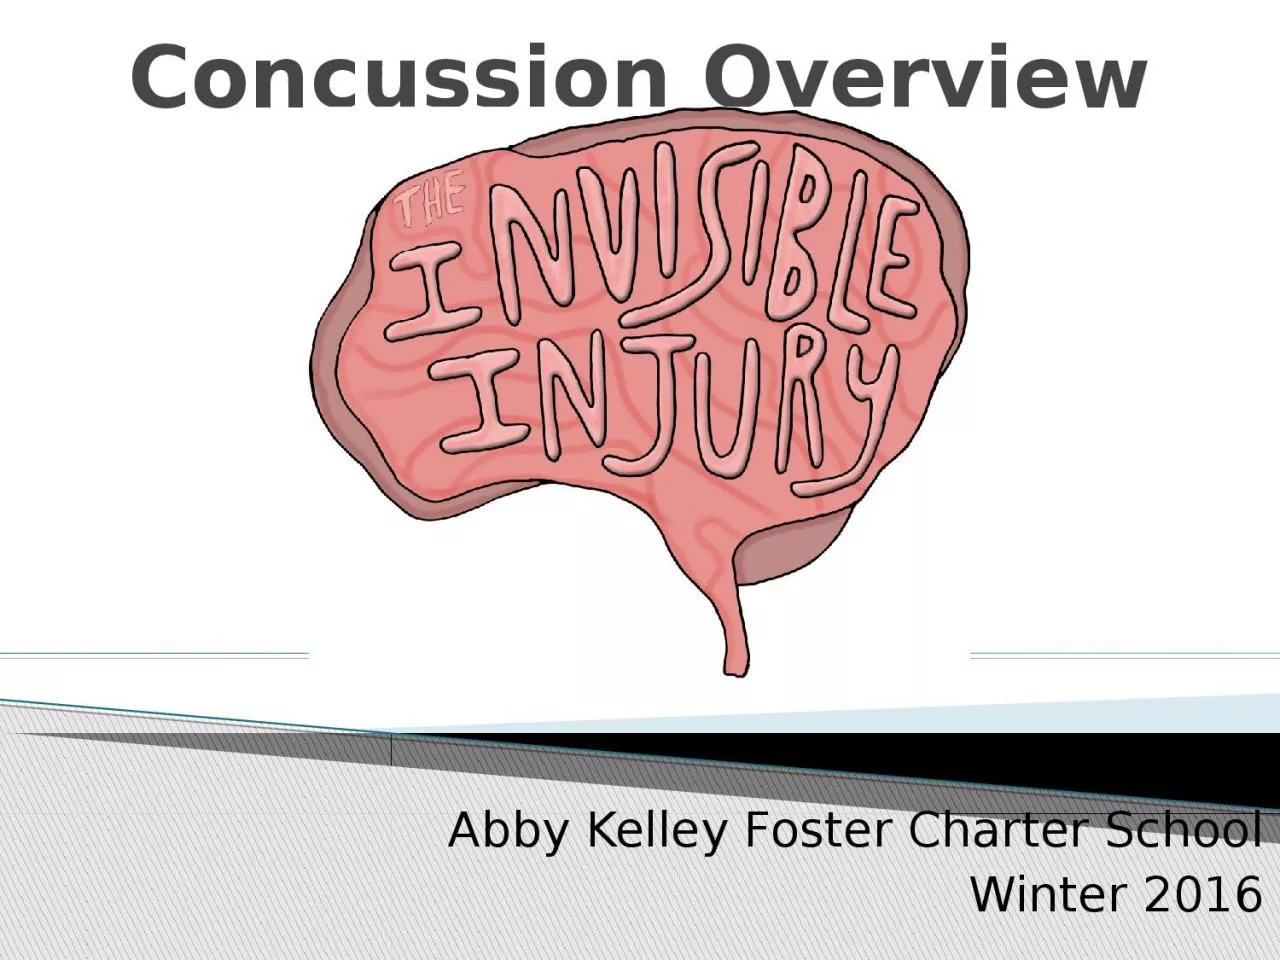 Concussion Overview Abby Kelley Foster Charter School